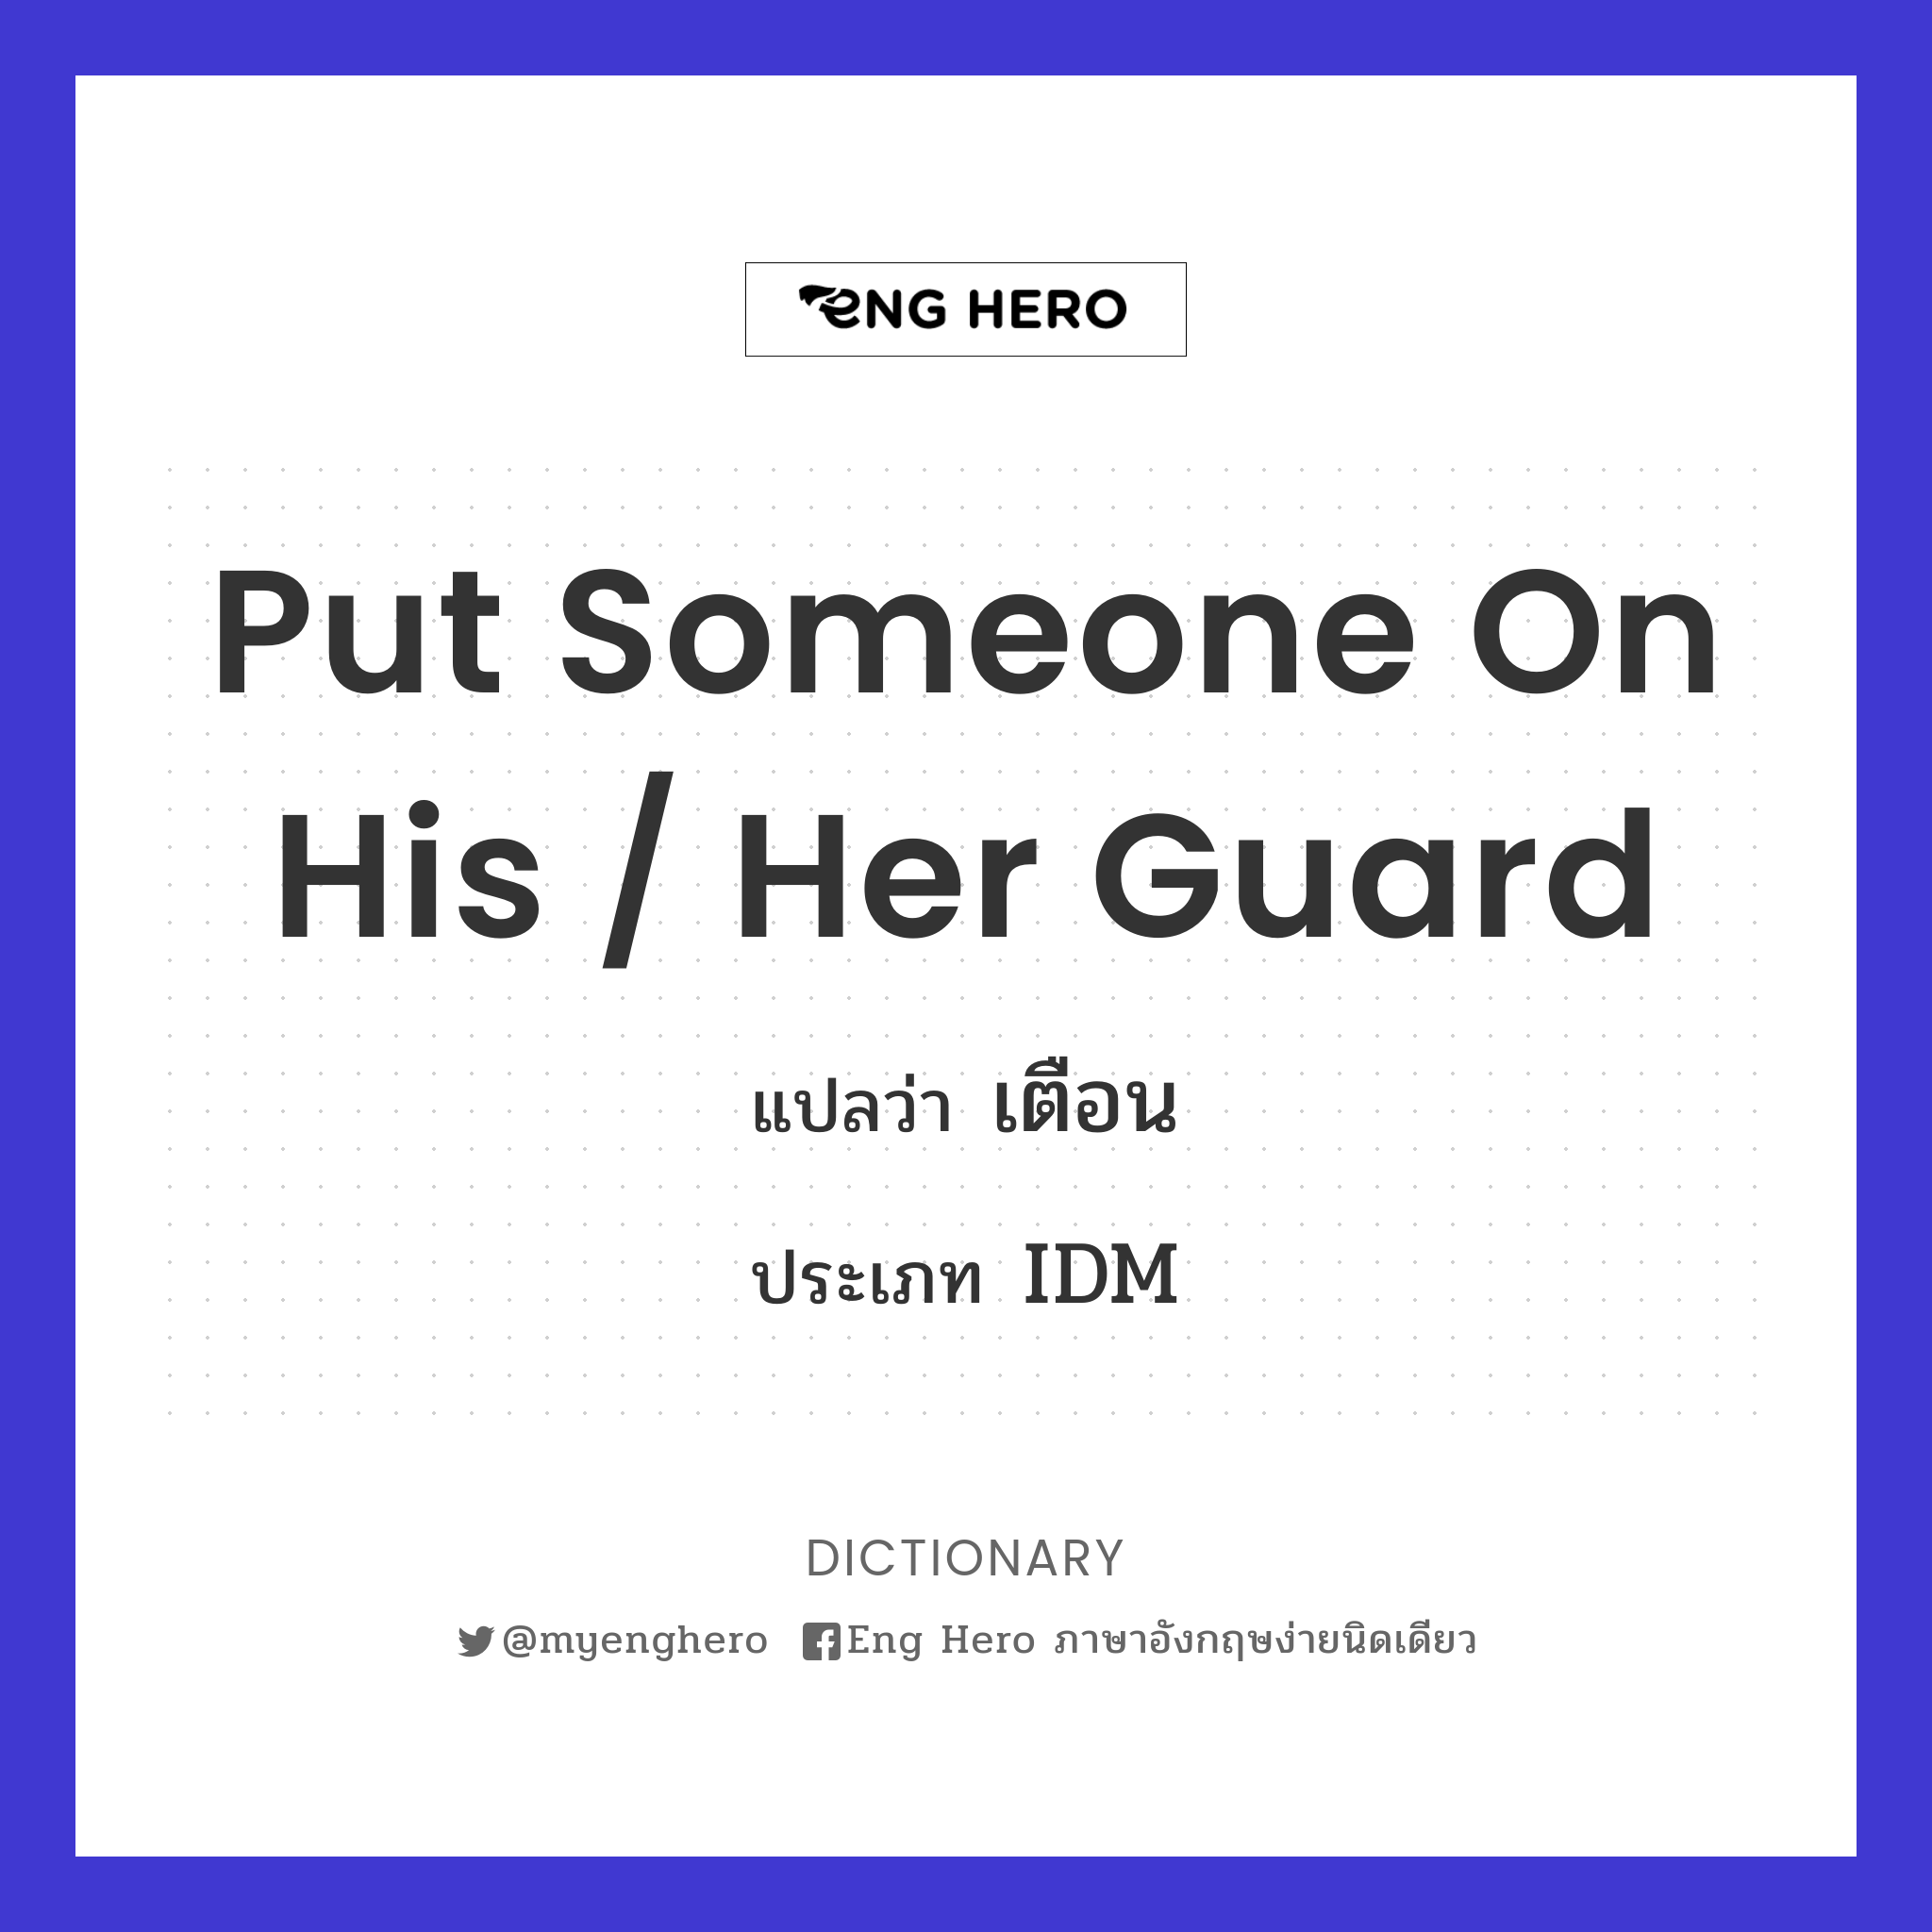 put someone on his / her guard